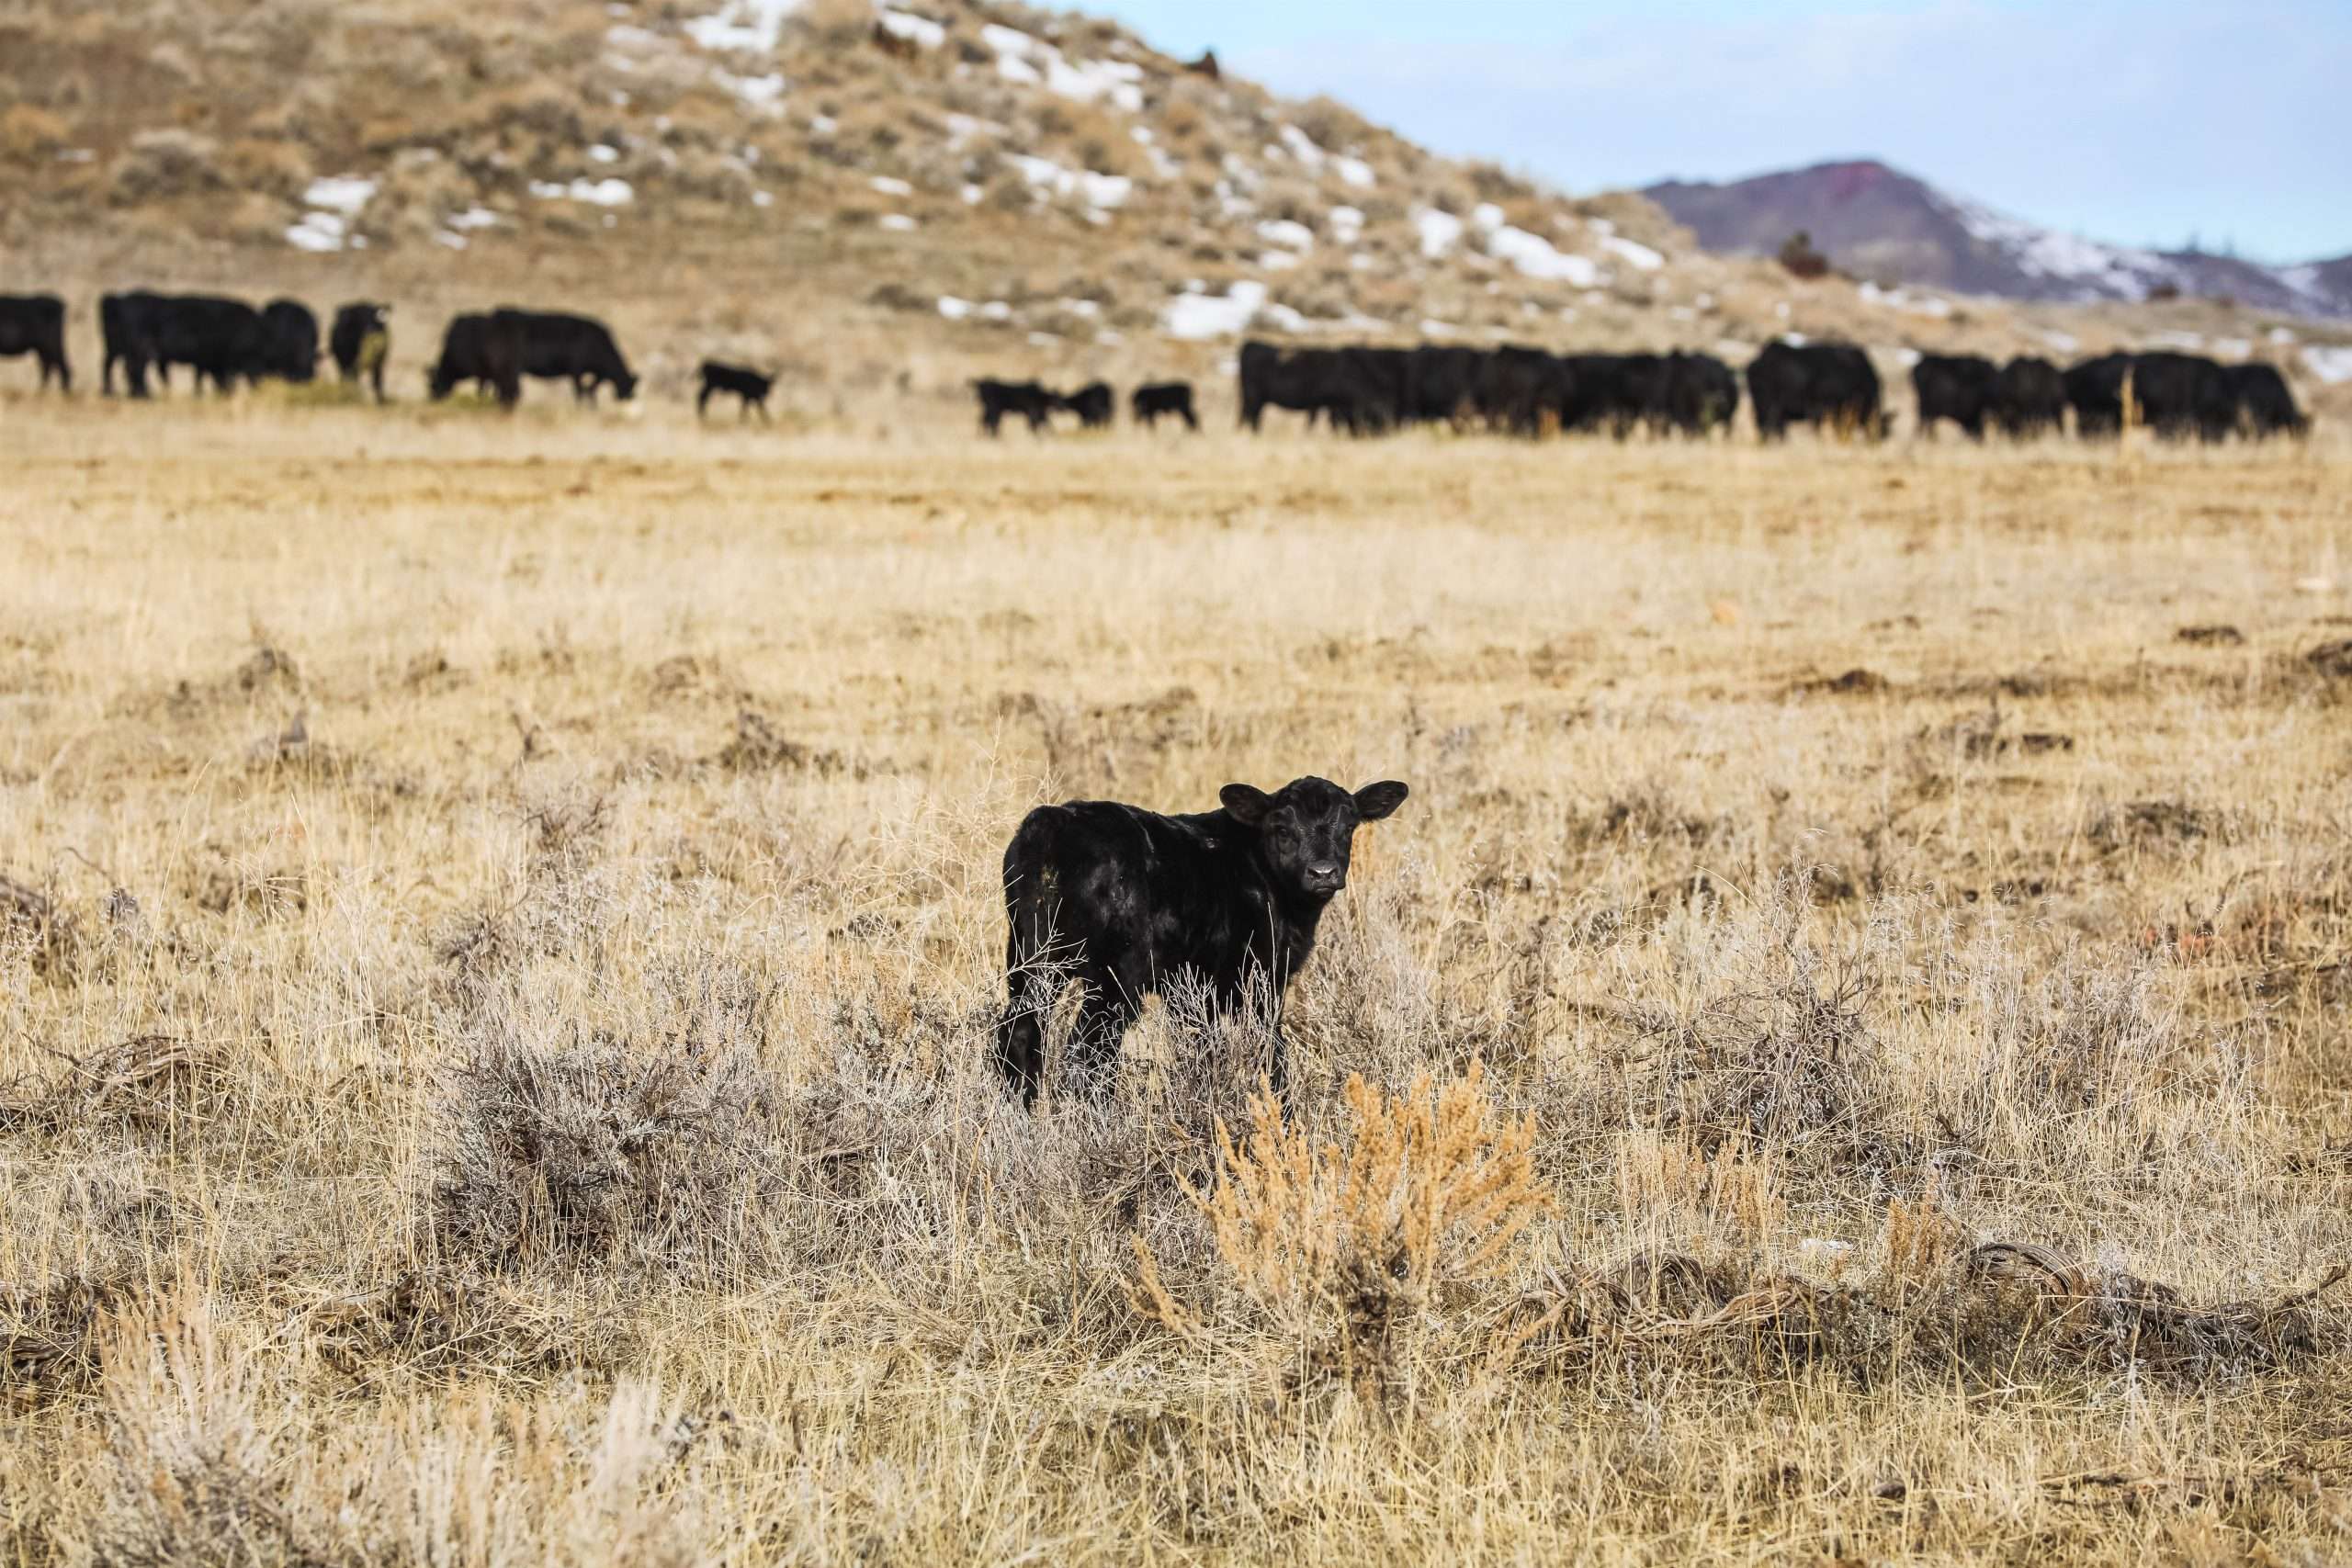 Calf in field on Montana ranch in front of herd of cattle